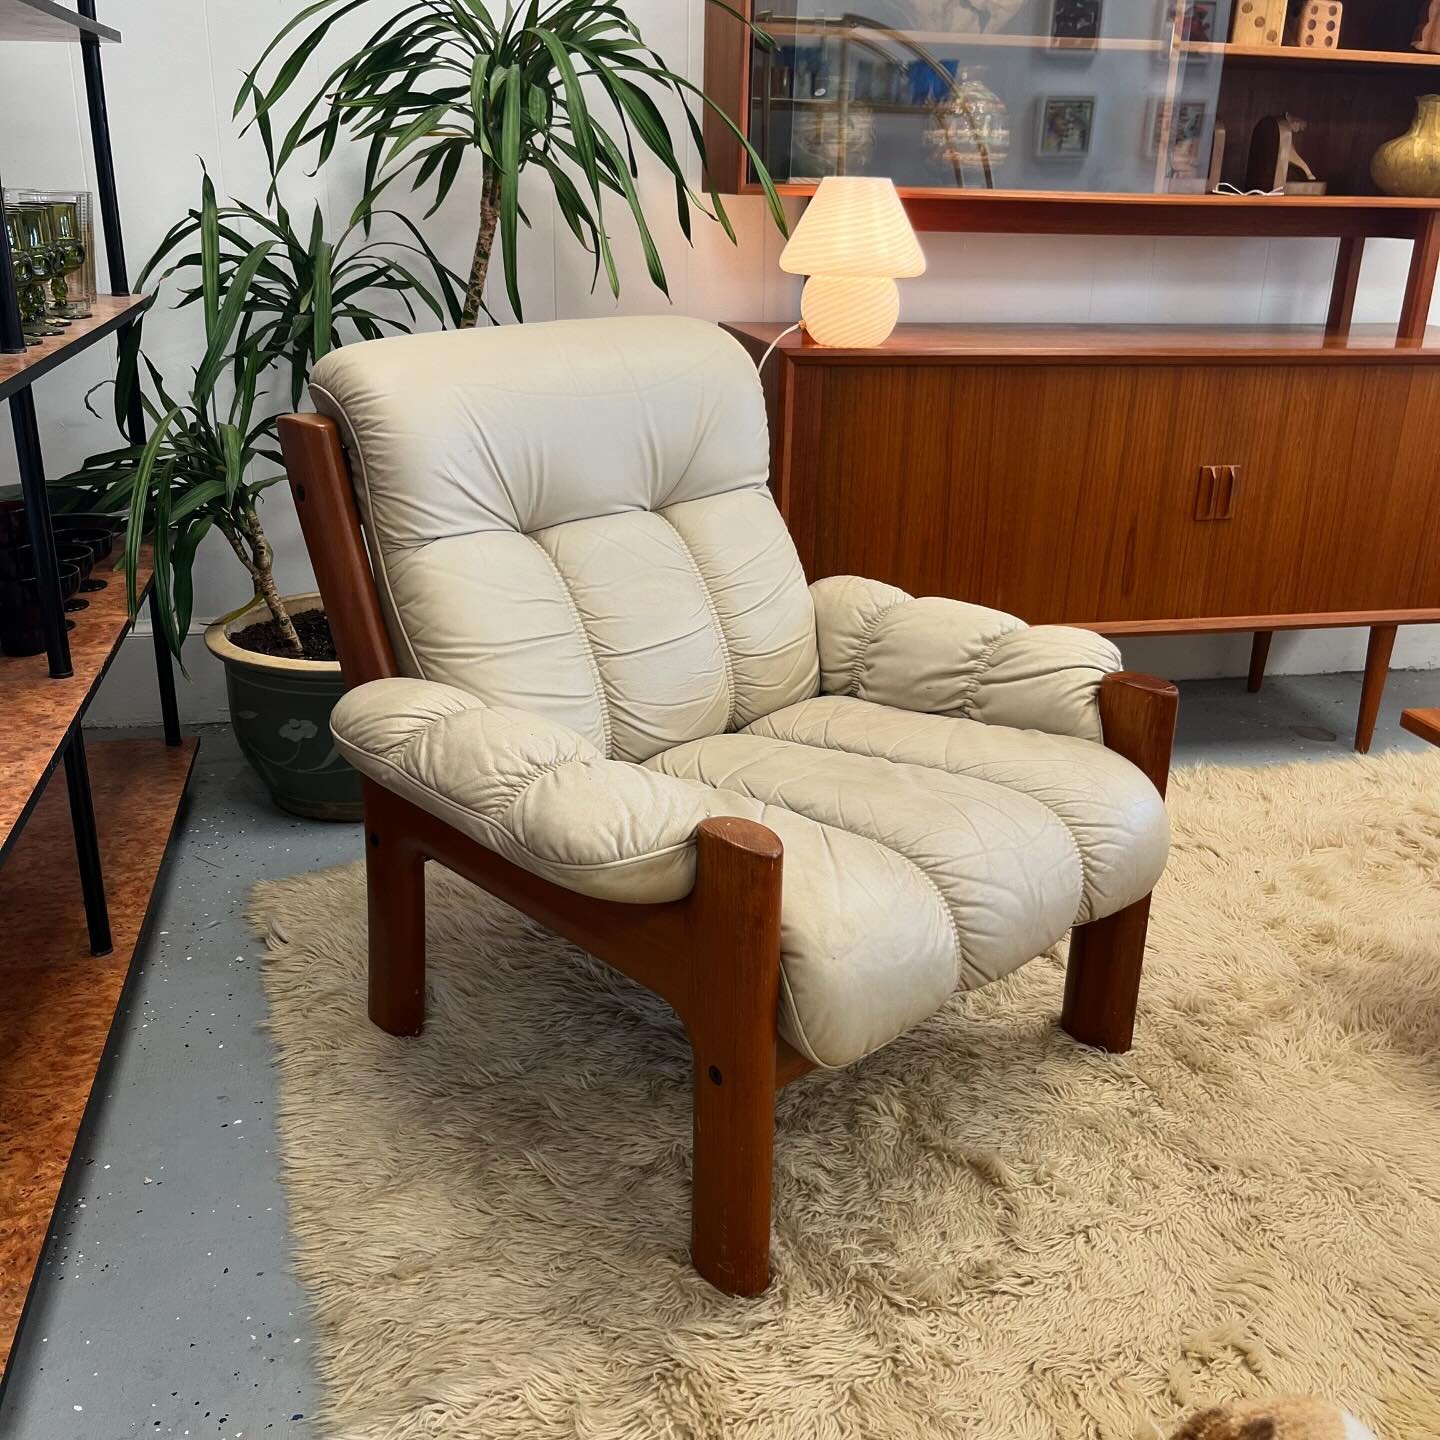 Ekornes Norway &ldquo;Montana&rdquo; Chair 

$850 + tax 

32&rdquo; D x 35&rdquo; W x 16.5&rdquo; Seat H 

Leather &amp; Teak made in Norway. Very good vintage condition. Extremely comfortable. 

*dm or purchase directly online*